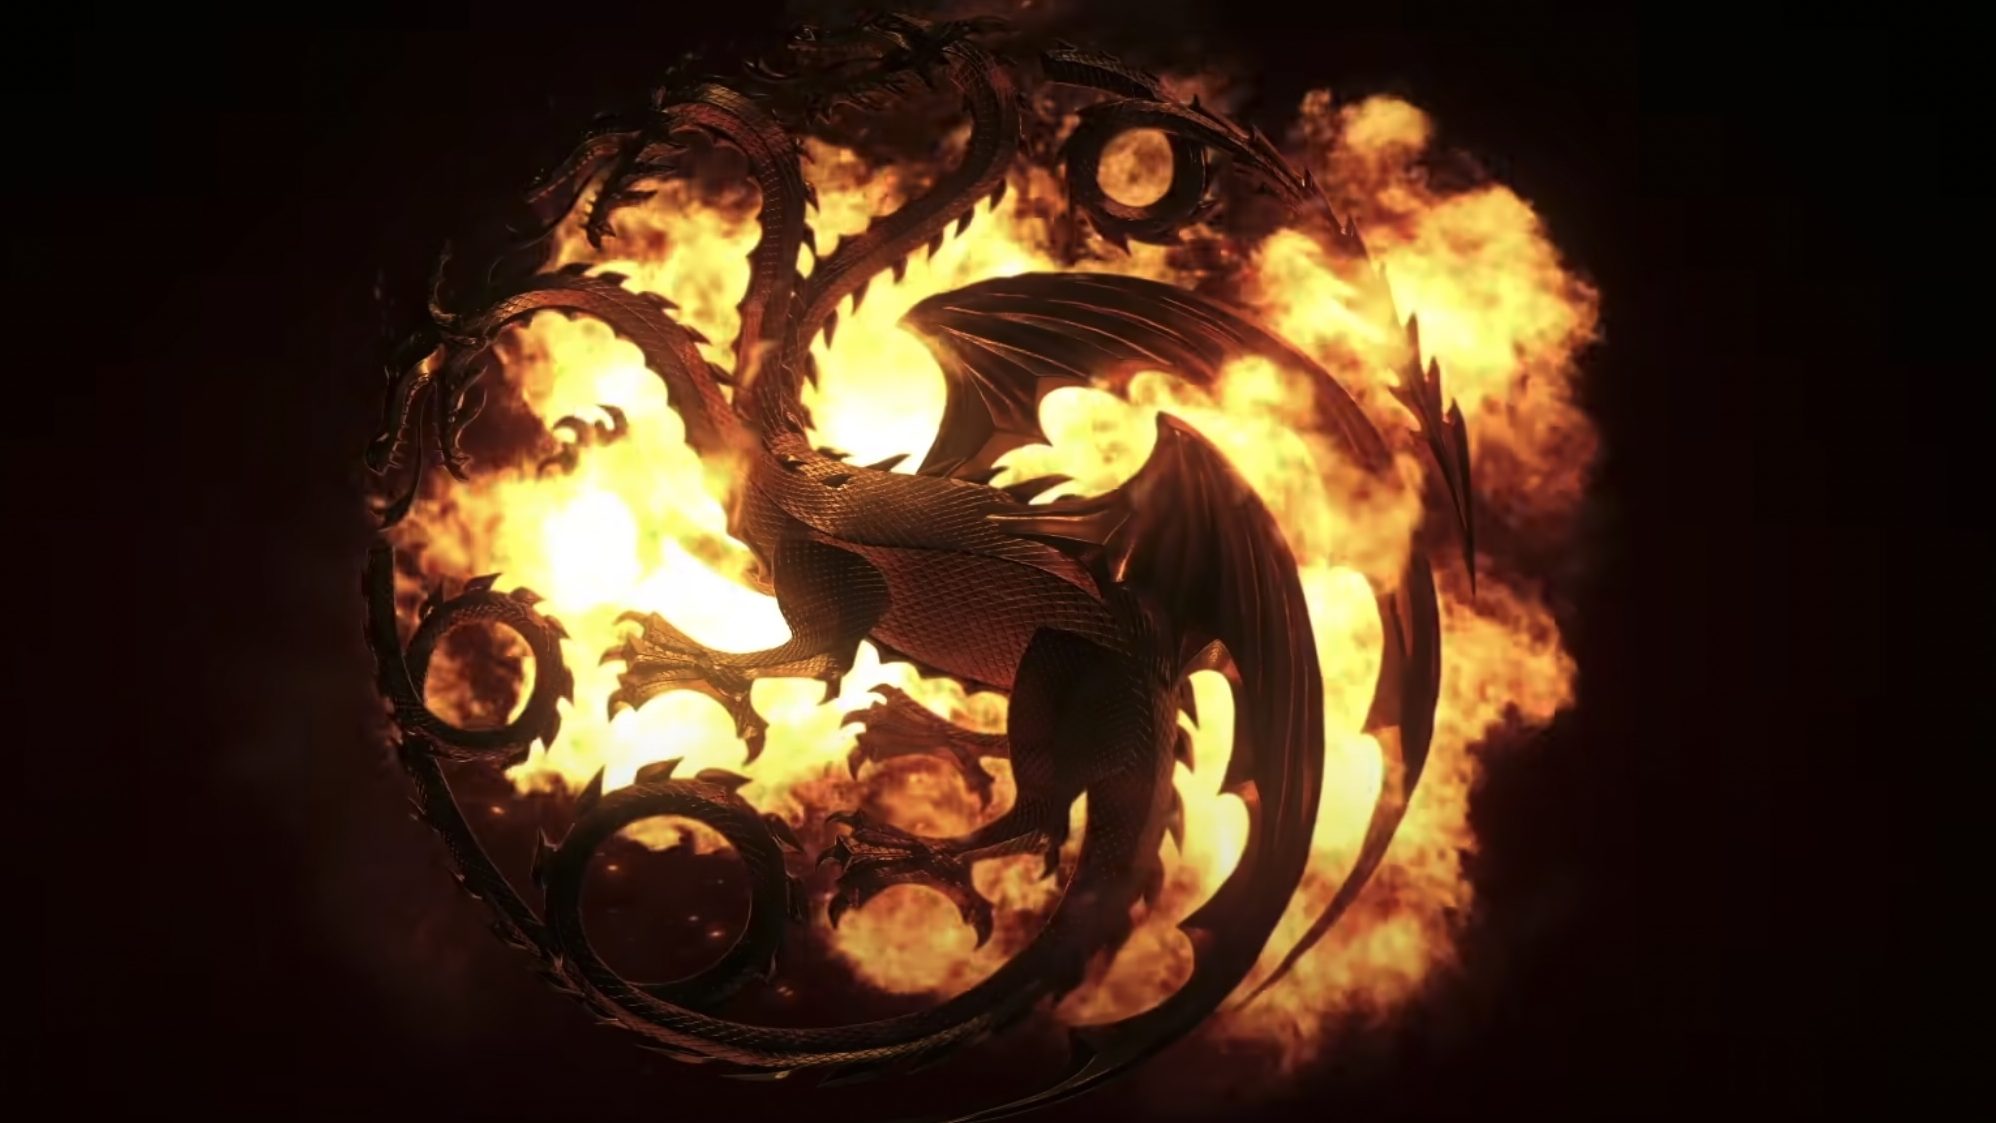 House of the Dragon  Watch and Stream Full Episodes Online